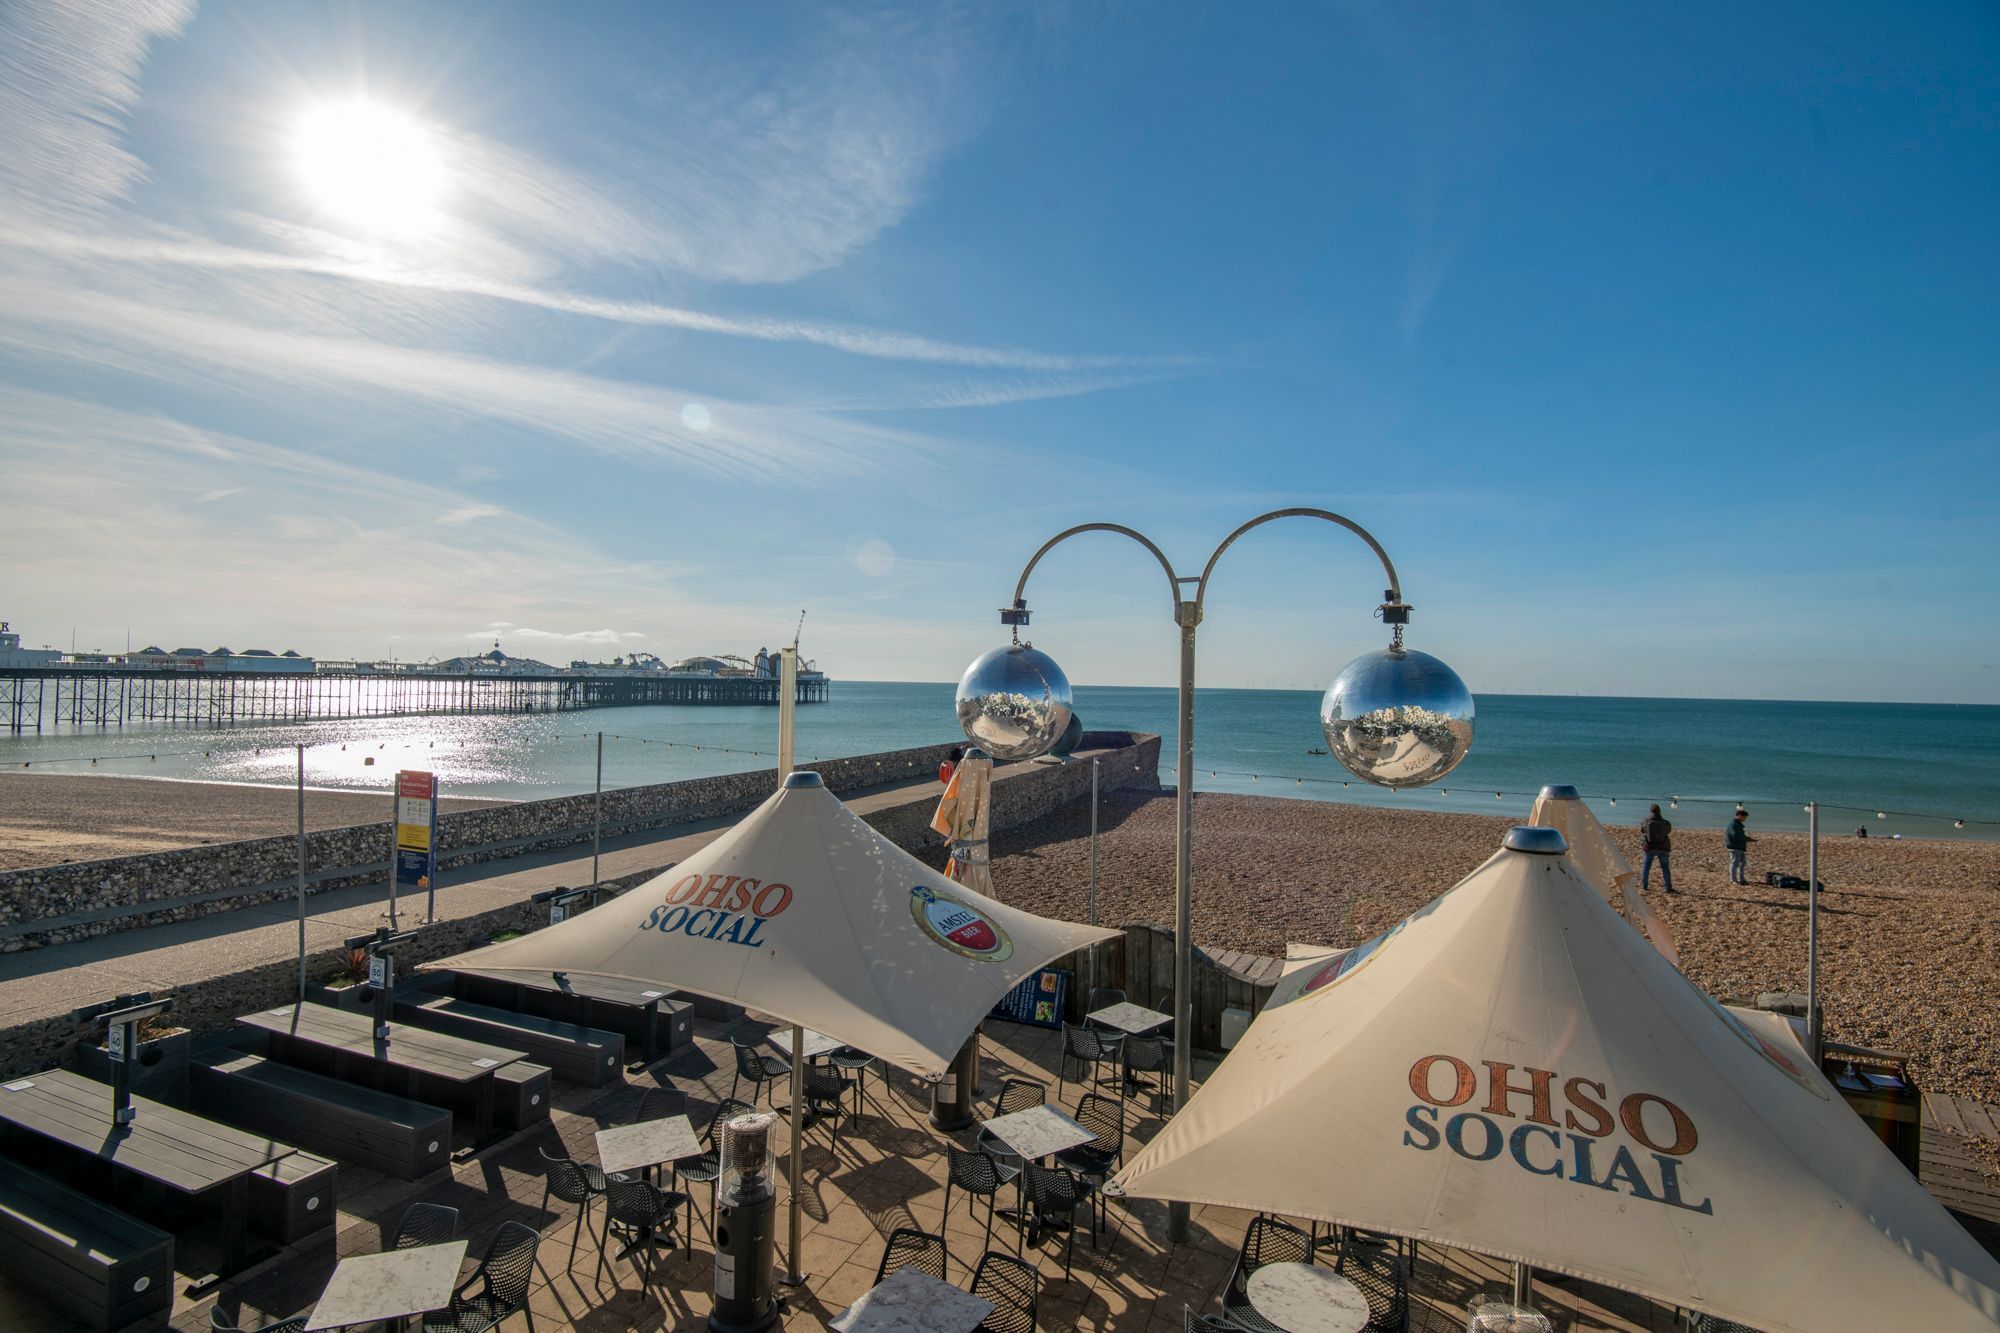 outdoor seating area at the ohso social, sunny day and beach view